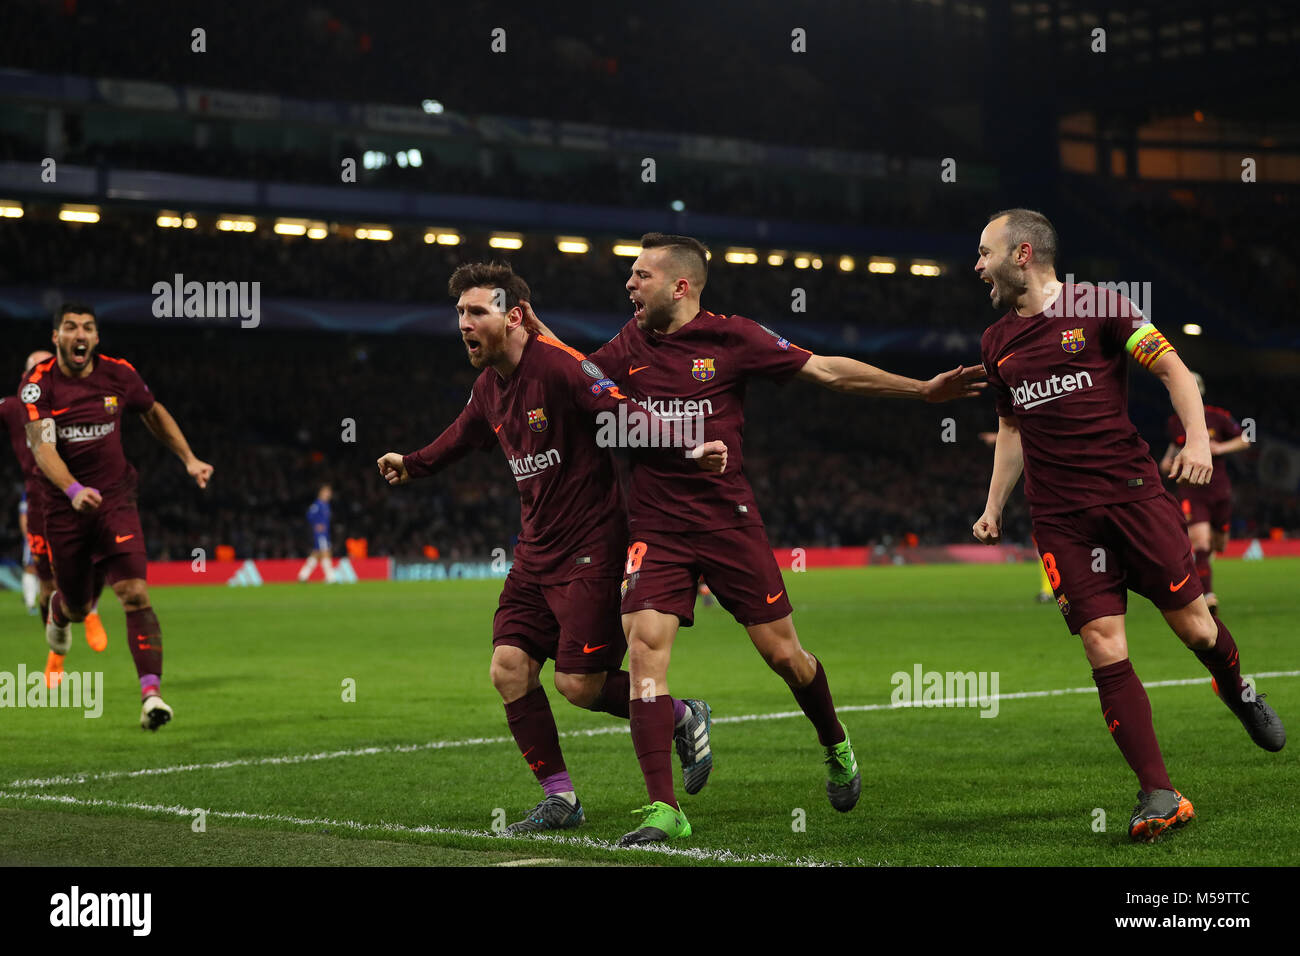 London, UK. 20th February, 2018. Lionel Messi of Barcelona celebrates with Jordi Alba and Andres Iniesta (right) after scoring the equalising goal, making it 1-1- Chelsea v Barcelona, UEFA Champions League, Round of 16, 1st Leg, Stamford Bridge, London - 20th February 2018. Credit: Richard Calver/Alamy Live News Stock Photo